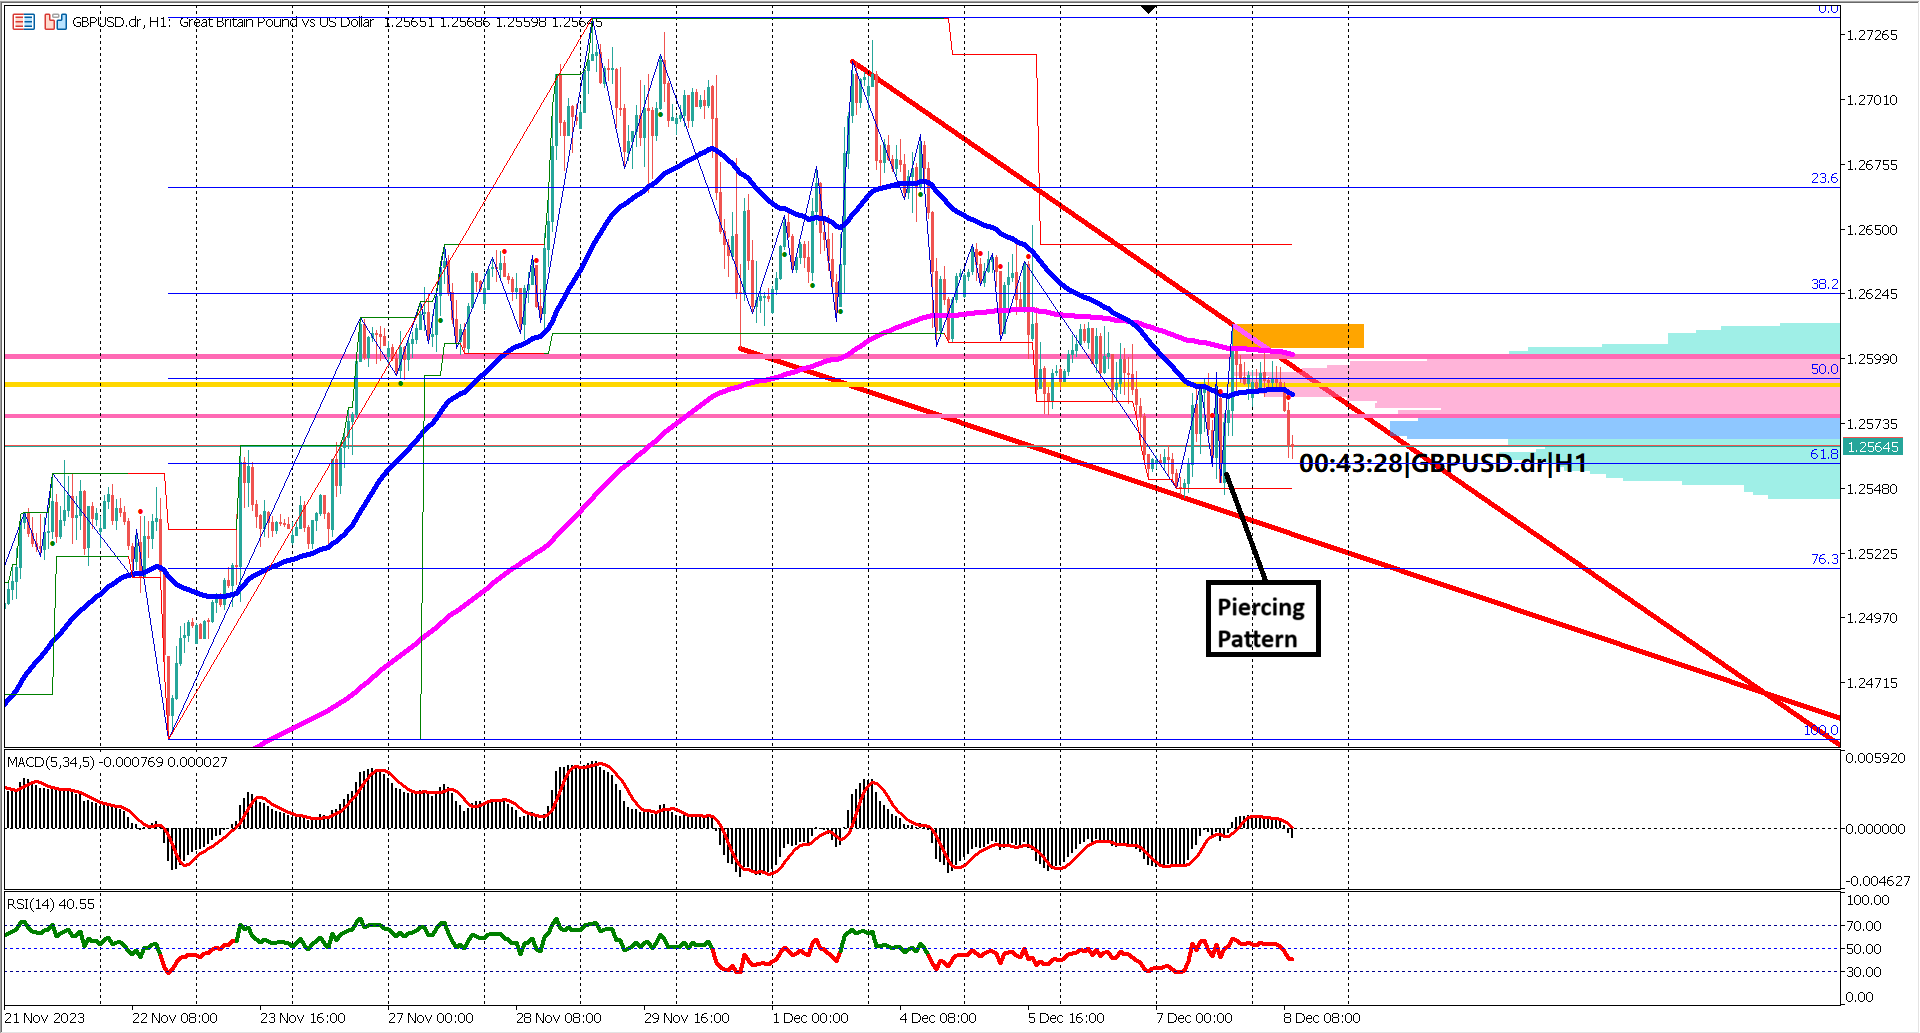 GBPUSD Faces Crossroads Ahead of US NFP and Unemployment Rate: Is a Bullish Reversal Brewing?